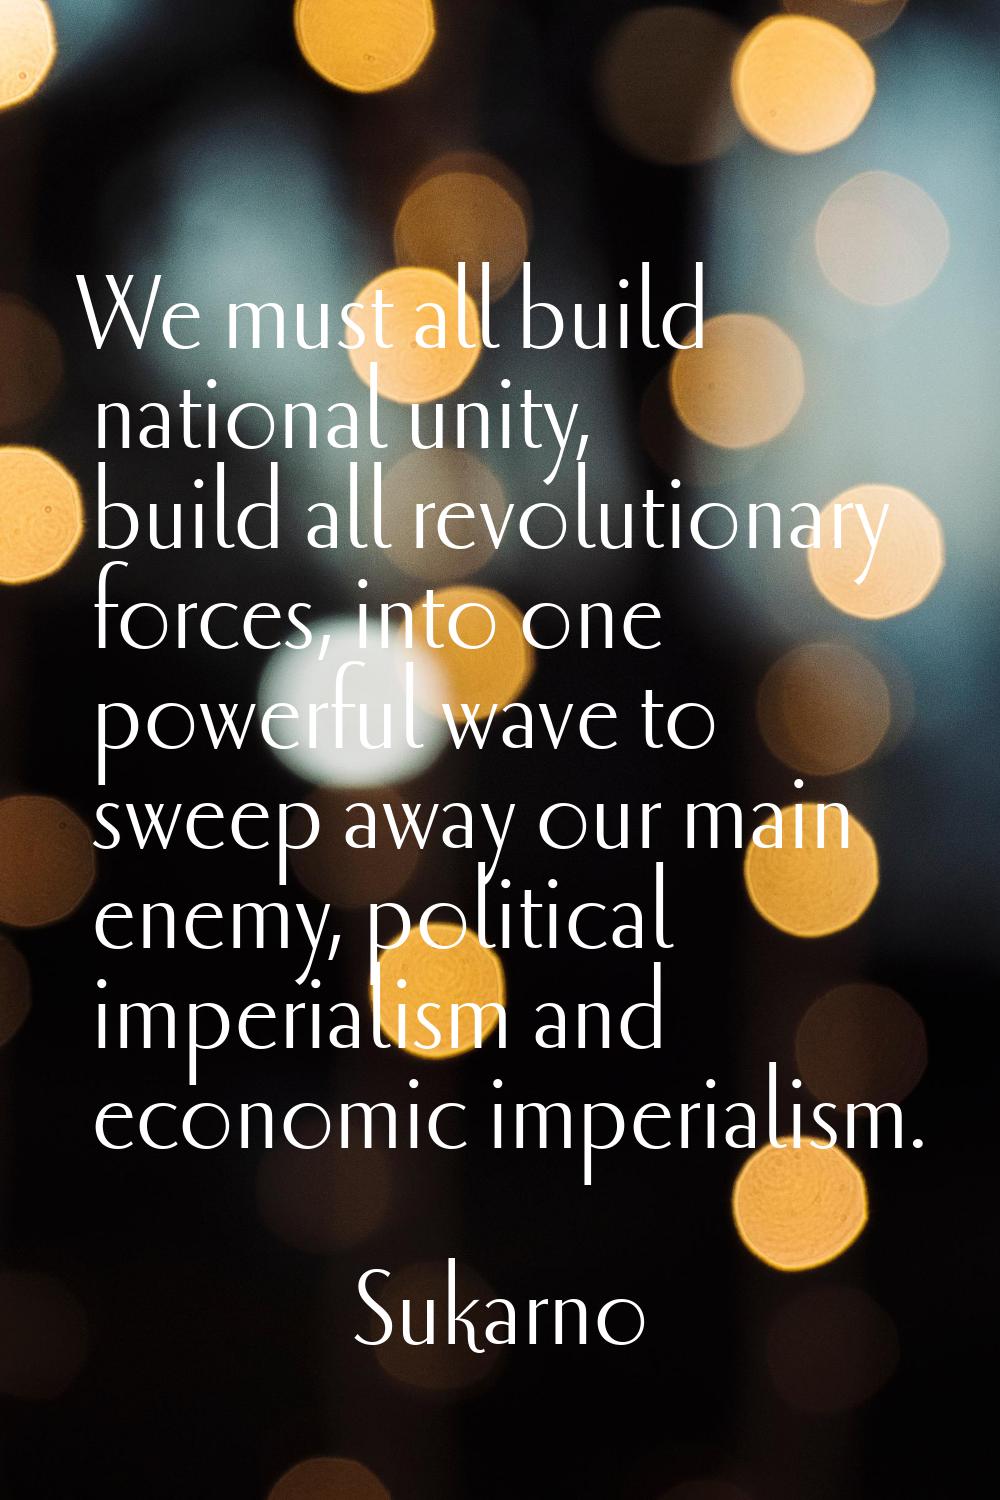 We must all build national unity, build all revolutionary forces, into one powerful wave to sweep a